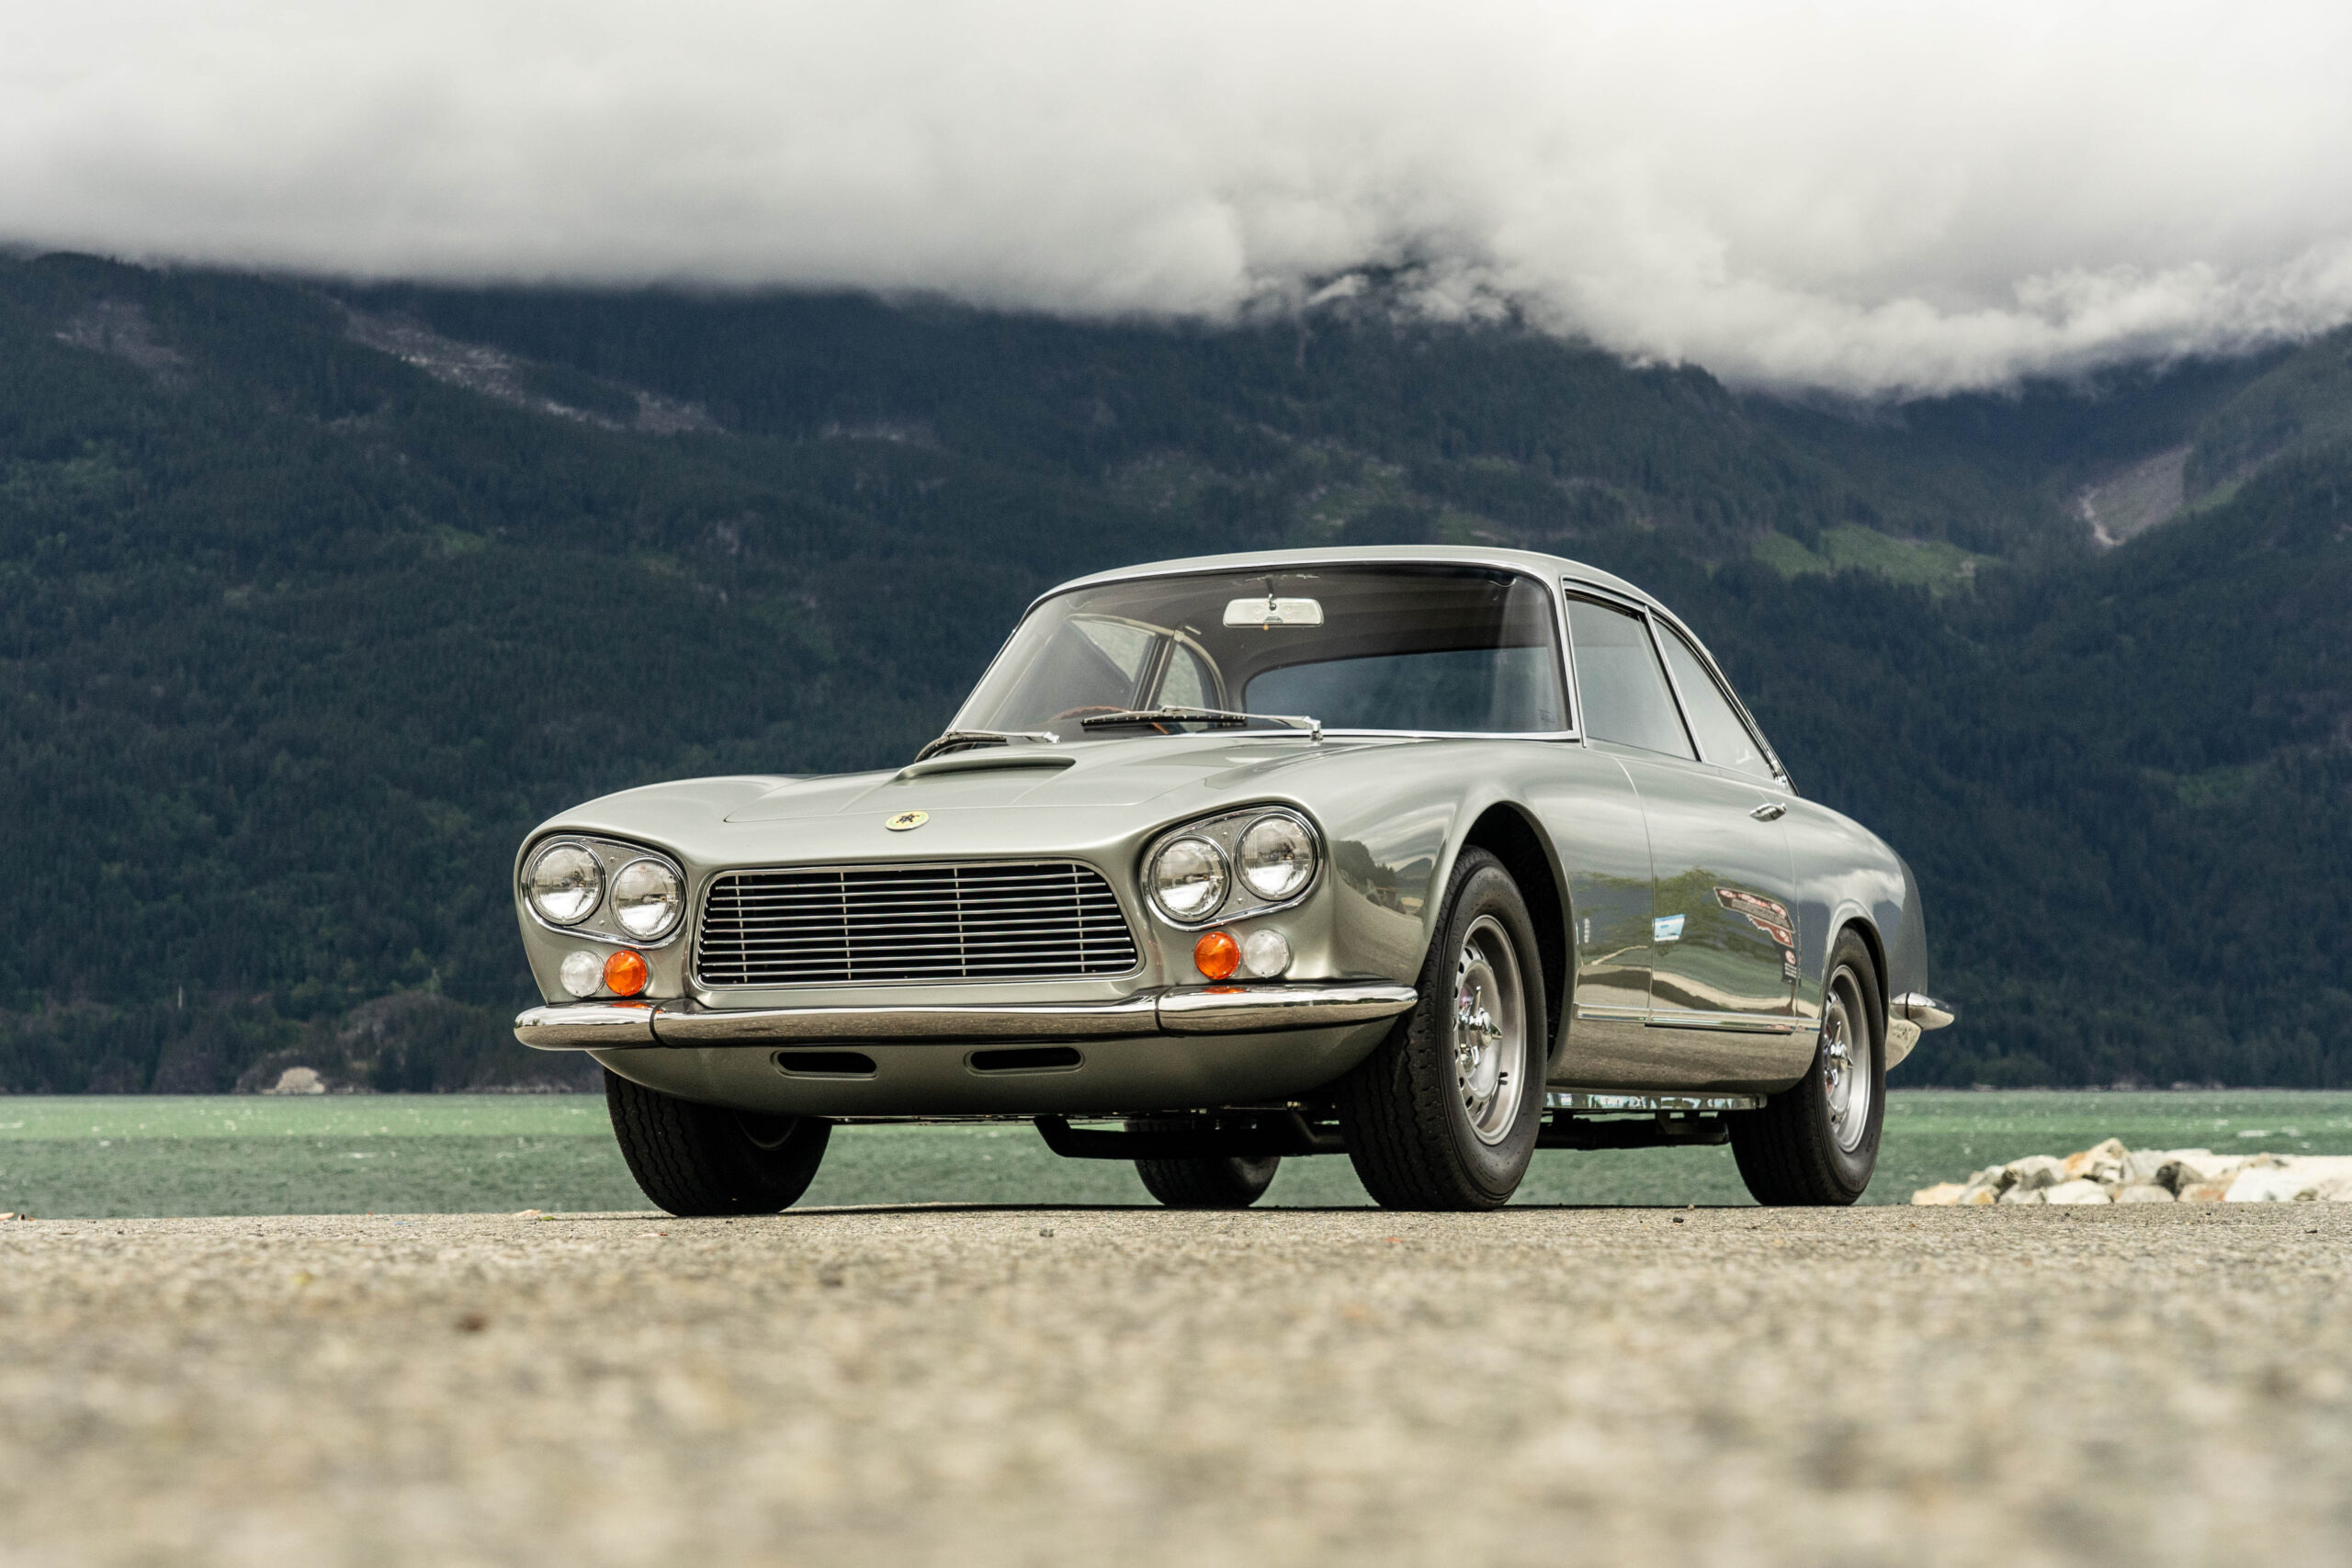 The Gordon-Keeble GT: A Tortoise on the Nose but a V8 under the Hood